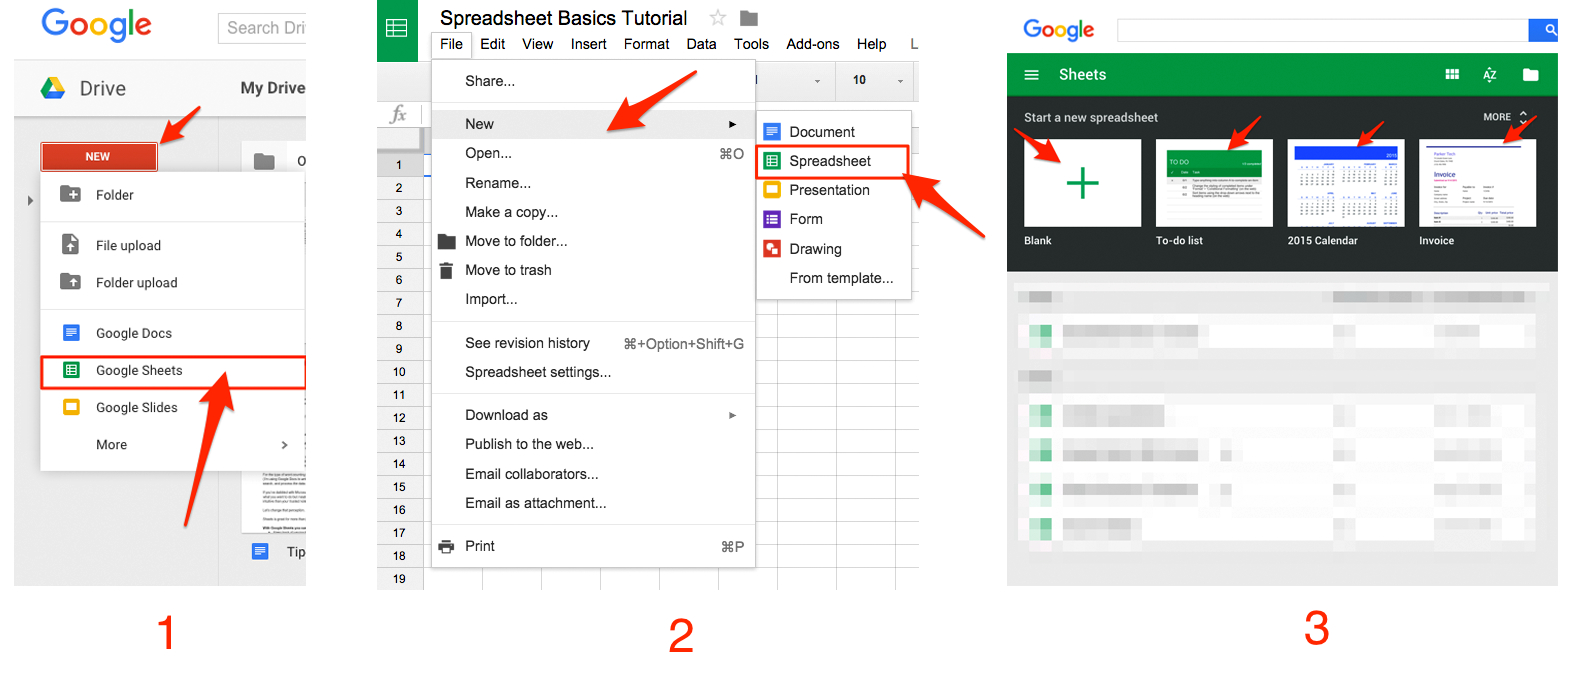 How To Do A Spreadsheet On Google Docs Throughout Google Sheets 101: The Beginner's Guide To Online Spreadsheets  The